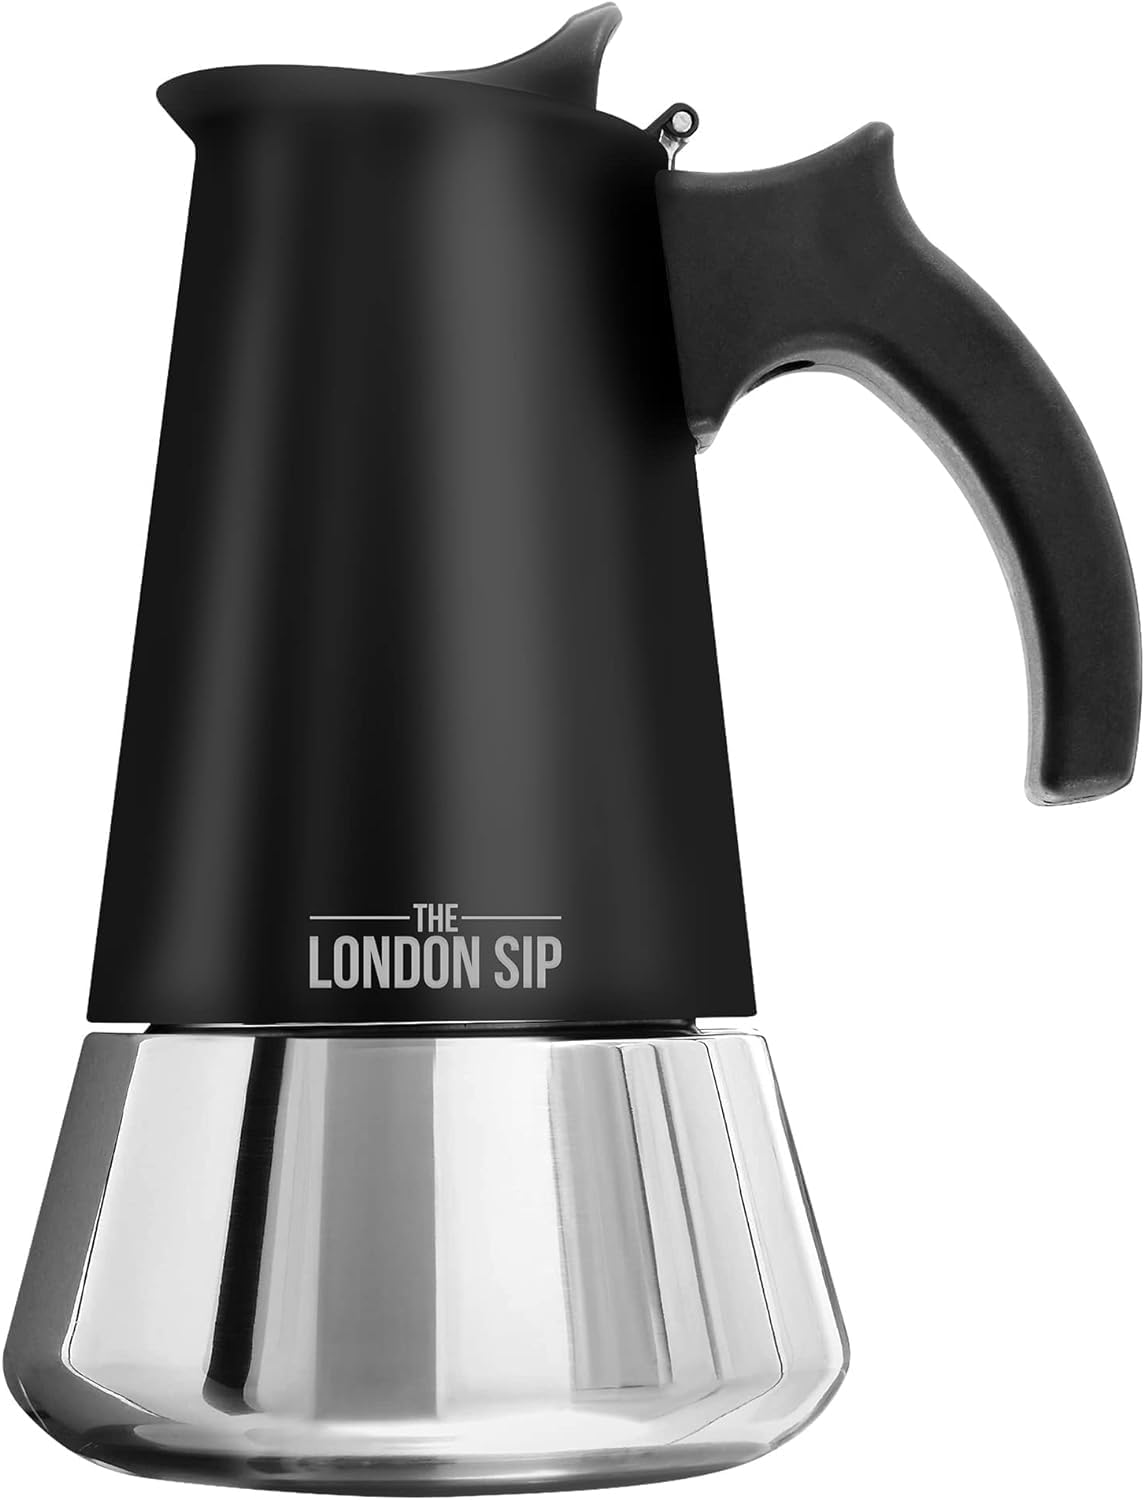 The London Sip Espresso Maker Suitable for Induction Cookers, Mocha Pot Made of Stainless Steel, Espresso Jug 3 Cups (150 ml), Mocha Pot Suitable for All Types of Cookers, Black